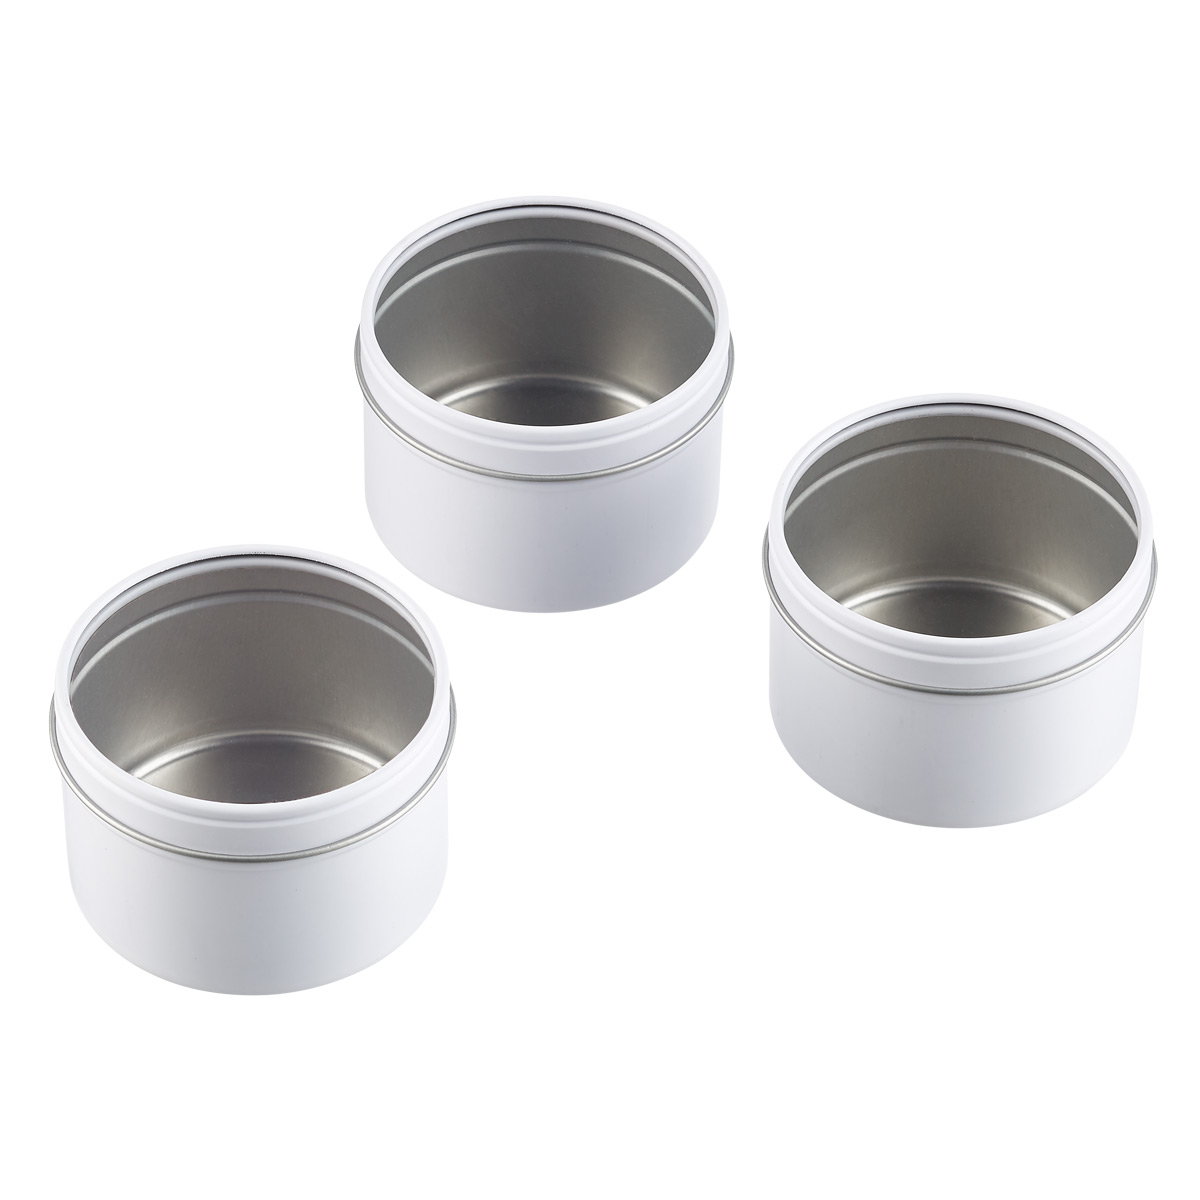 https://www.containerstore.com/catalogimages/382920/10079994-round-magnetic-tin-bins-wit.jpg